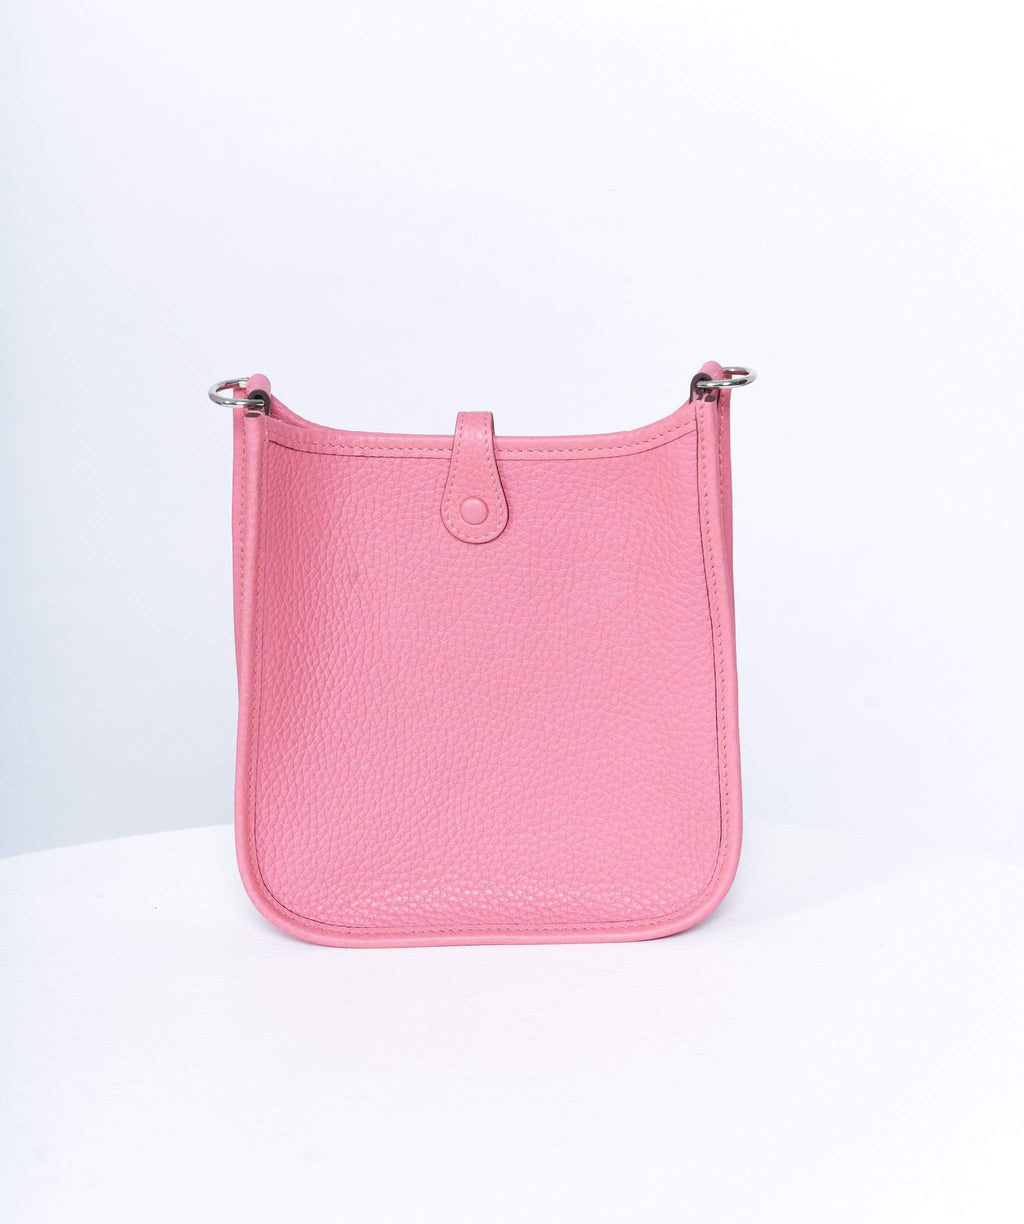 Shop HERMES Evelyne Hermes In the loop 18 collection by Kenista